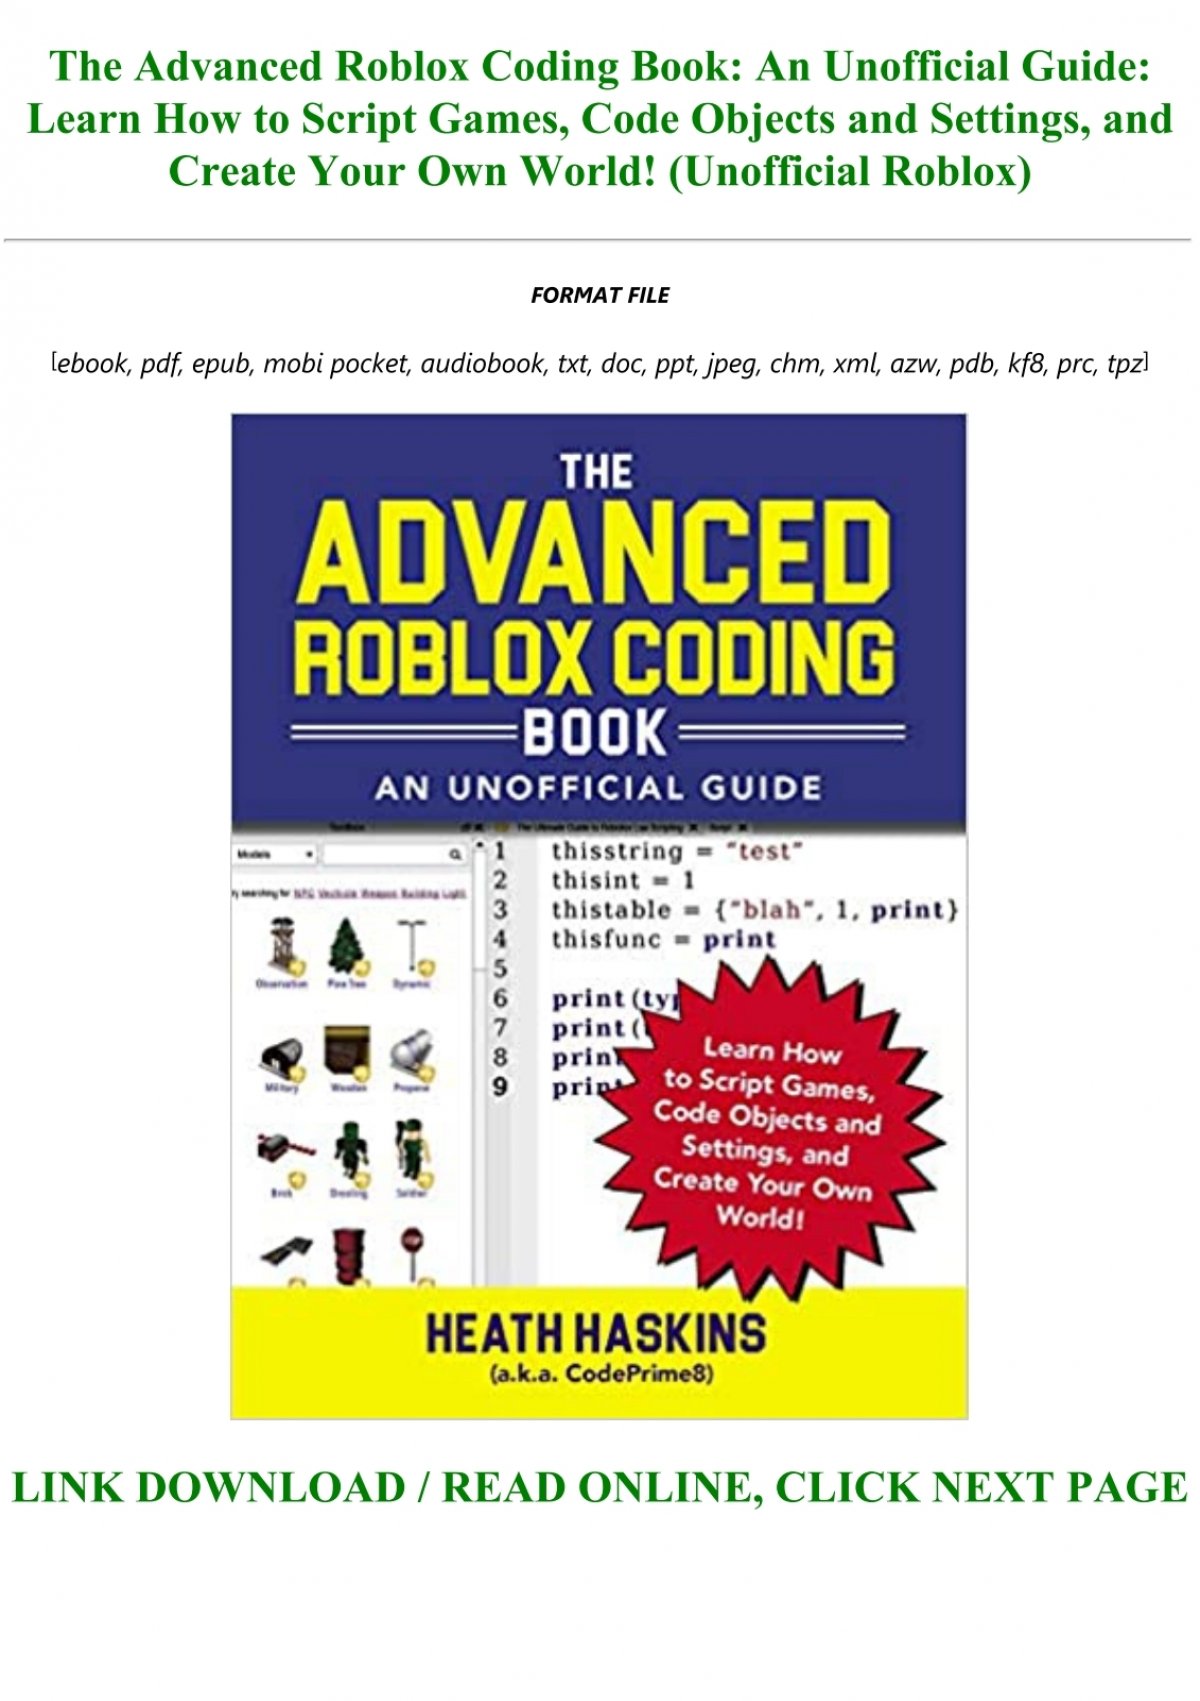 Download Pdf The Advanced Roblox Coding Book An Unofficial Guide Learn How To Script Games Code Objects And Settings And Create Your Own World Unofficial Roblox Pre Order - roblox game downloader script